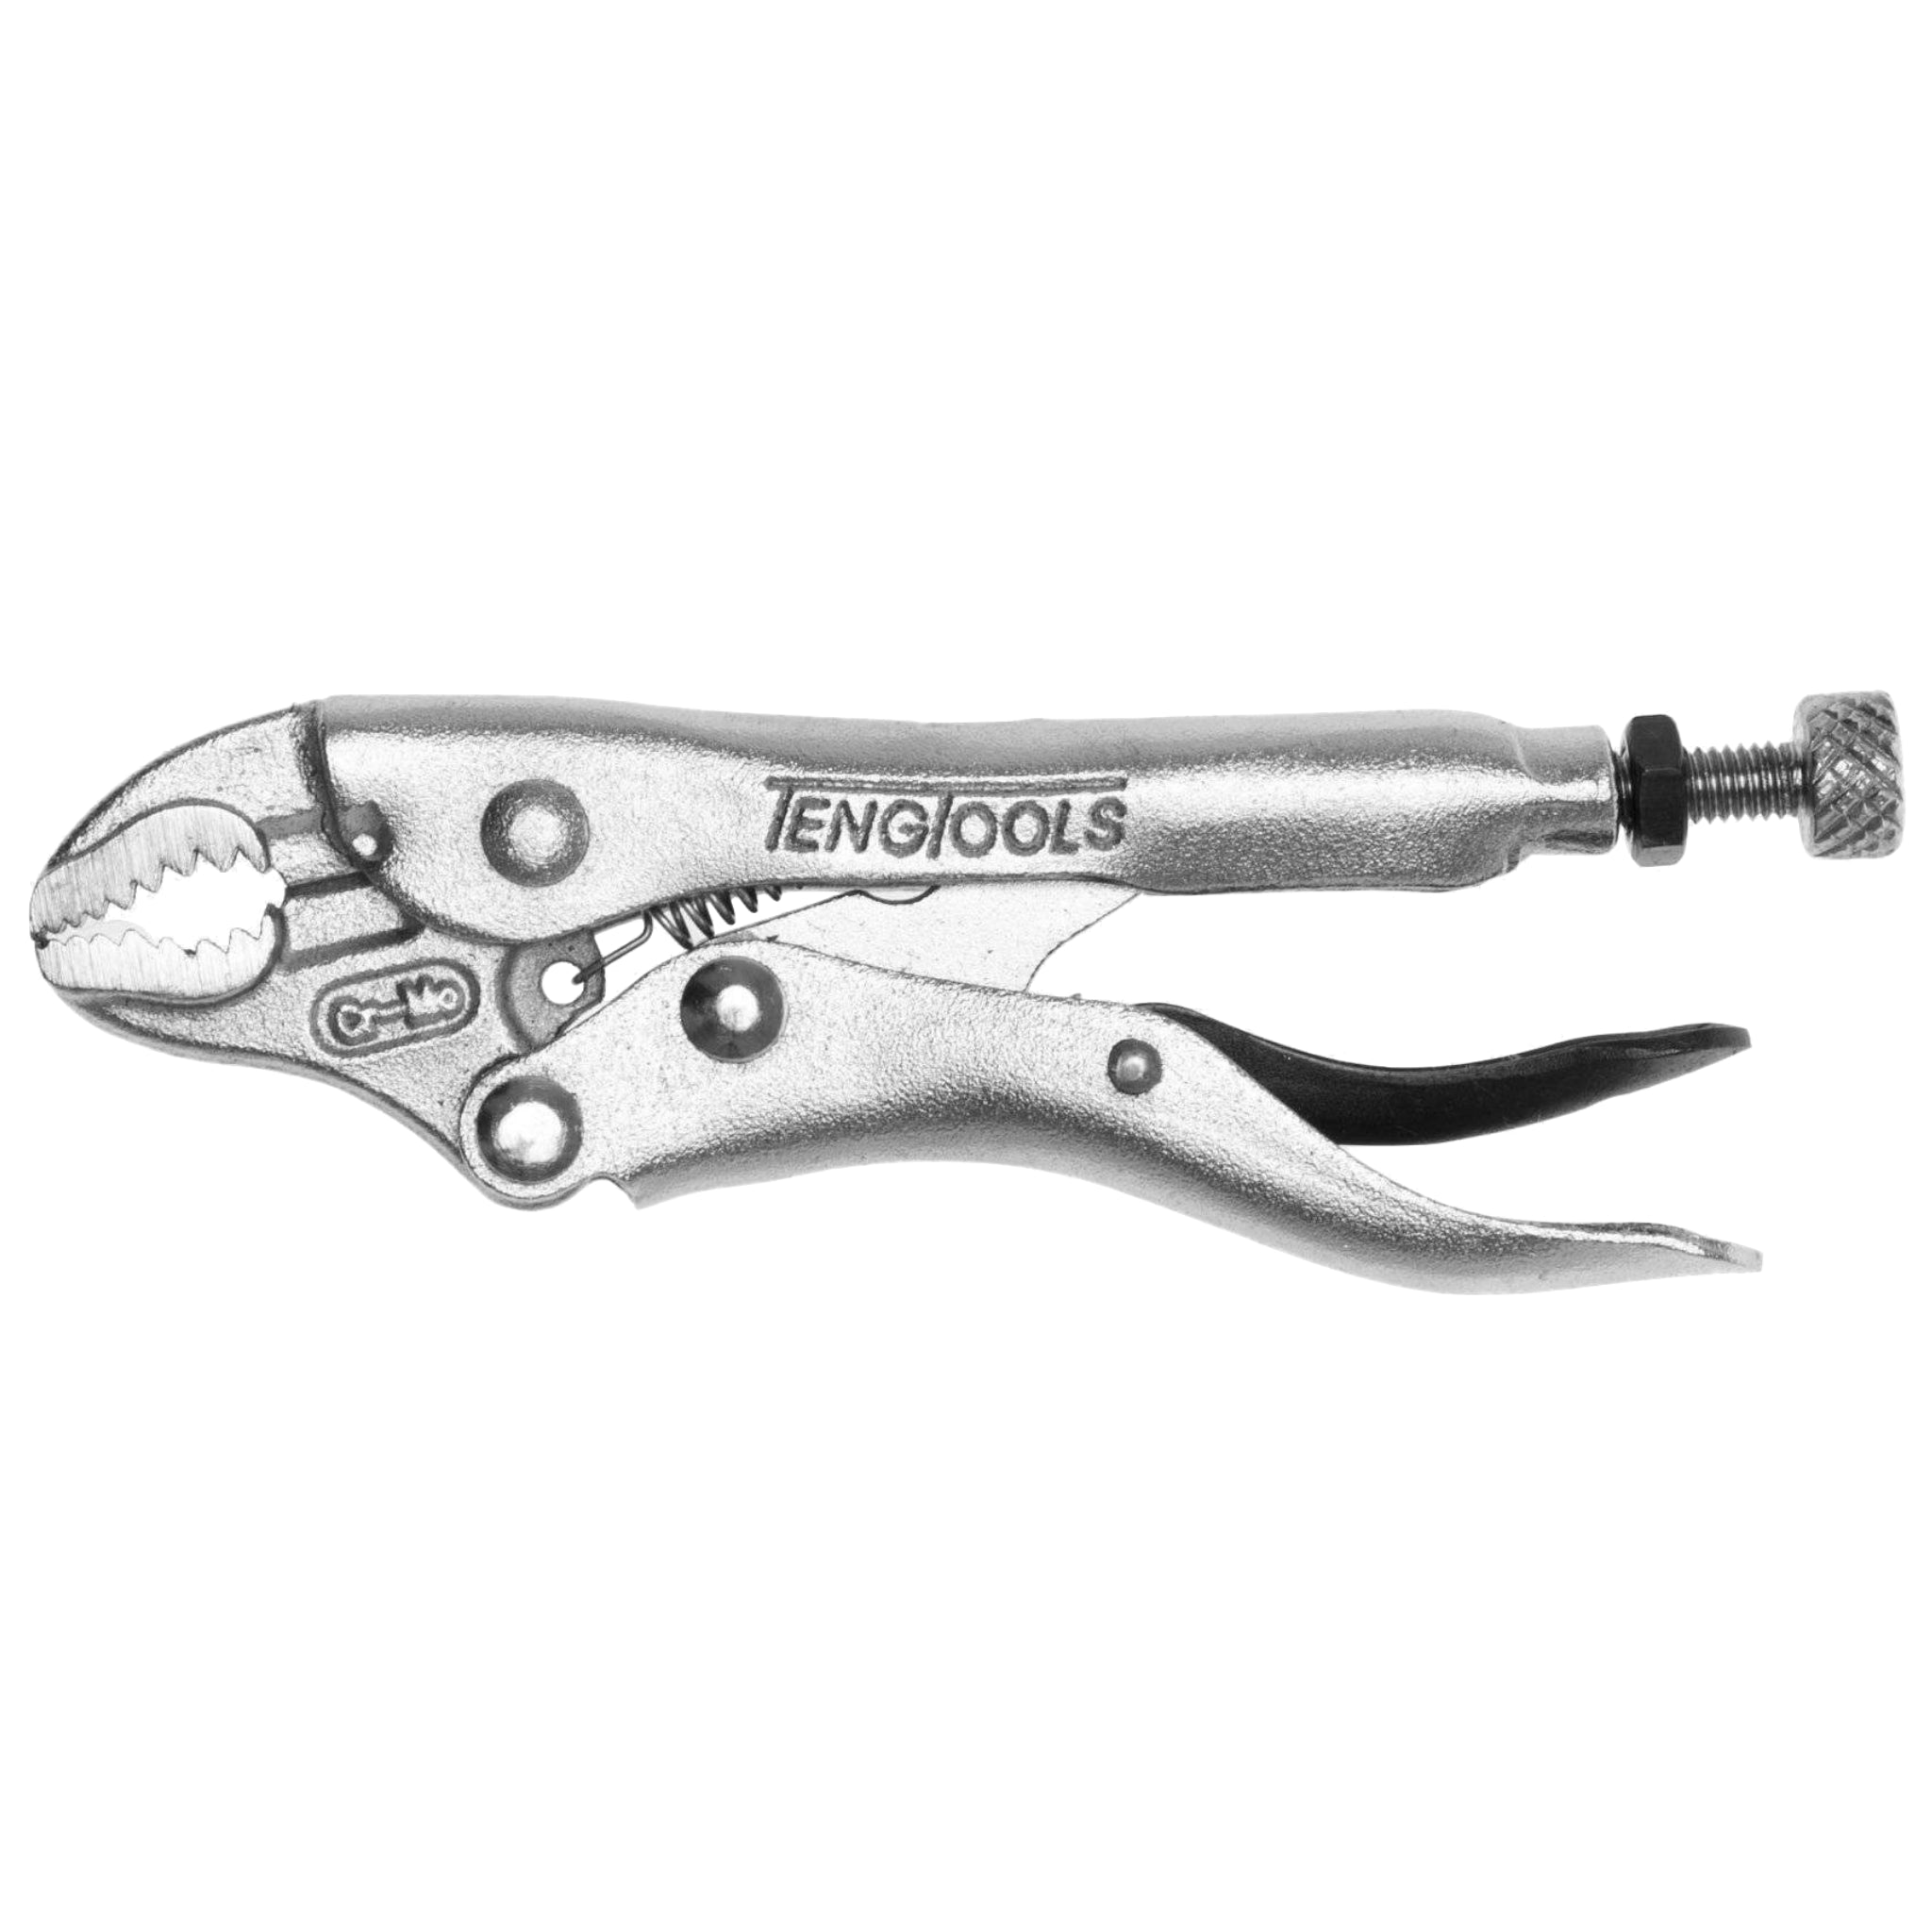 Teng Tools Locking Vise Grip Style Pliers With Curved Jaws - 5 Inch